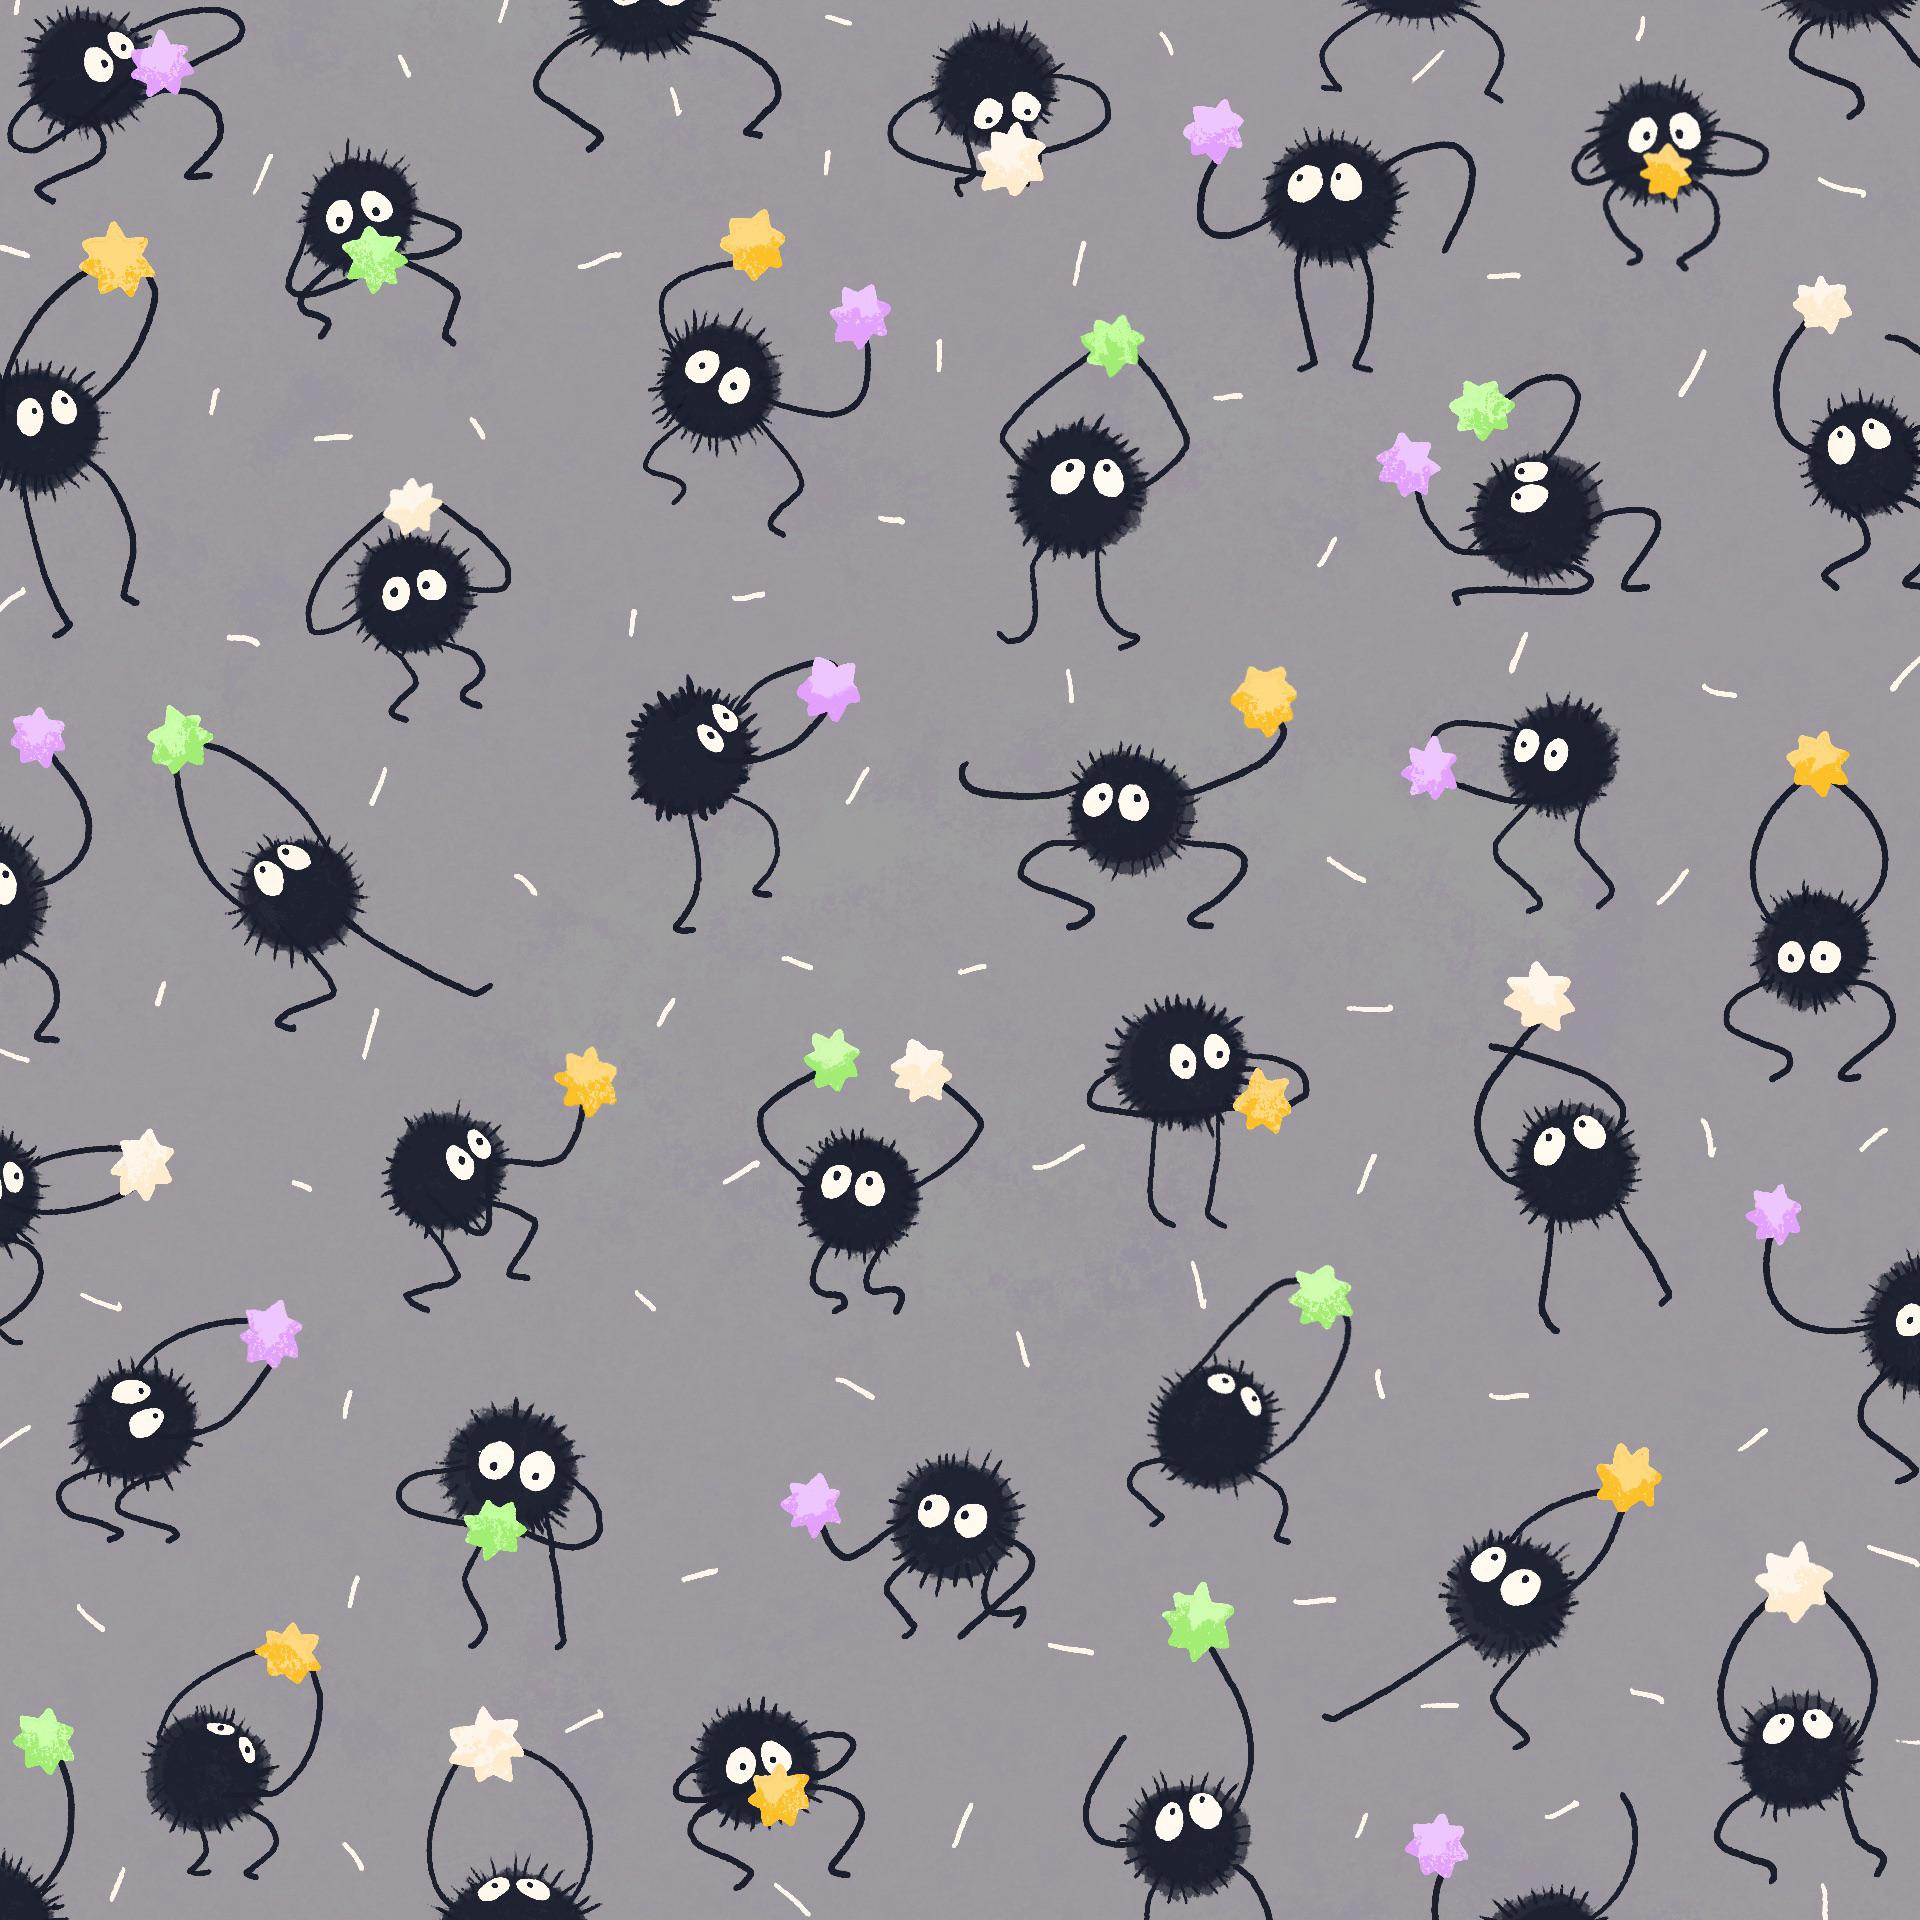 a soot sprite pattern I made! which one is your favorite?